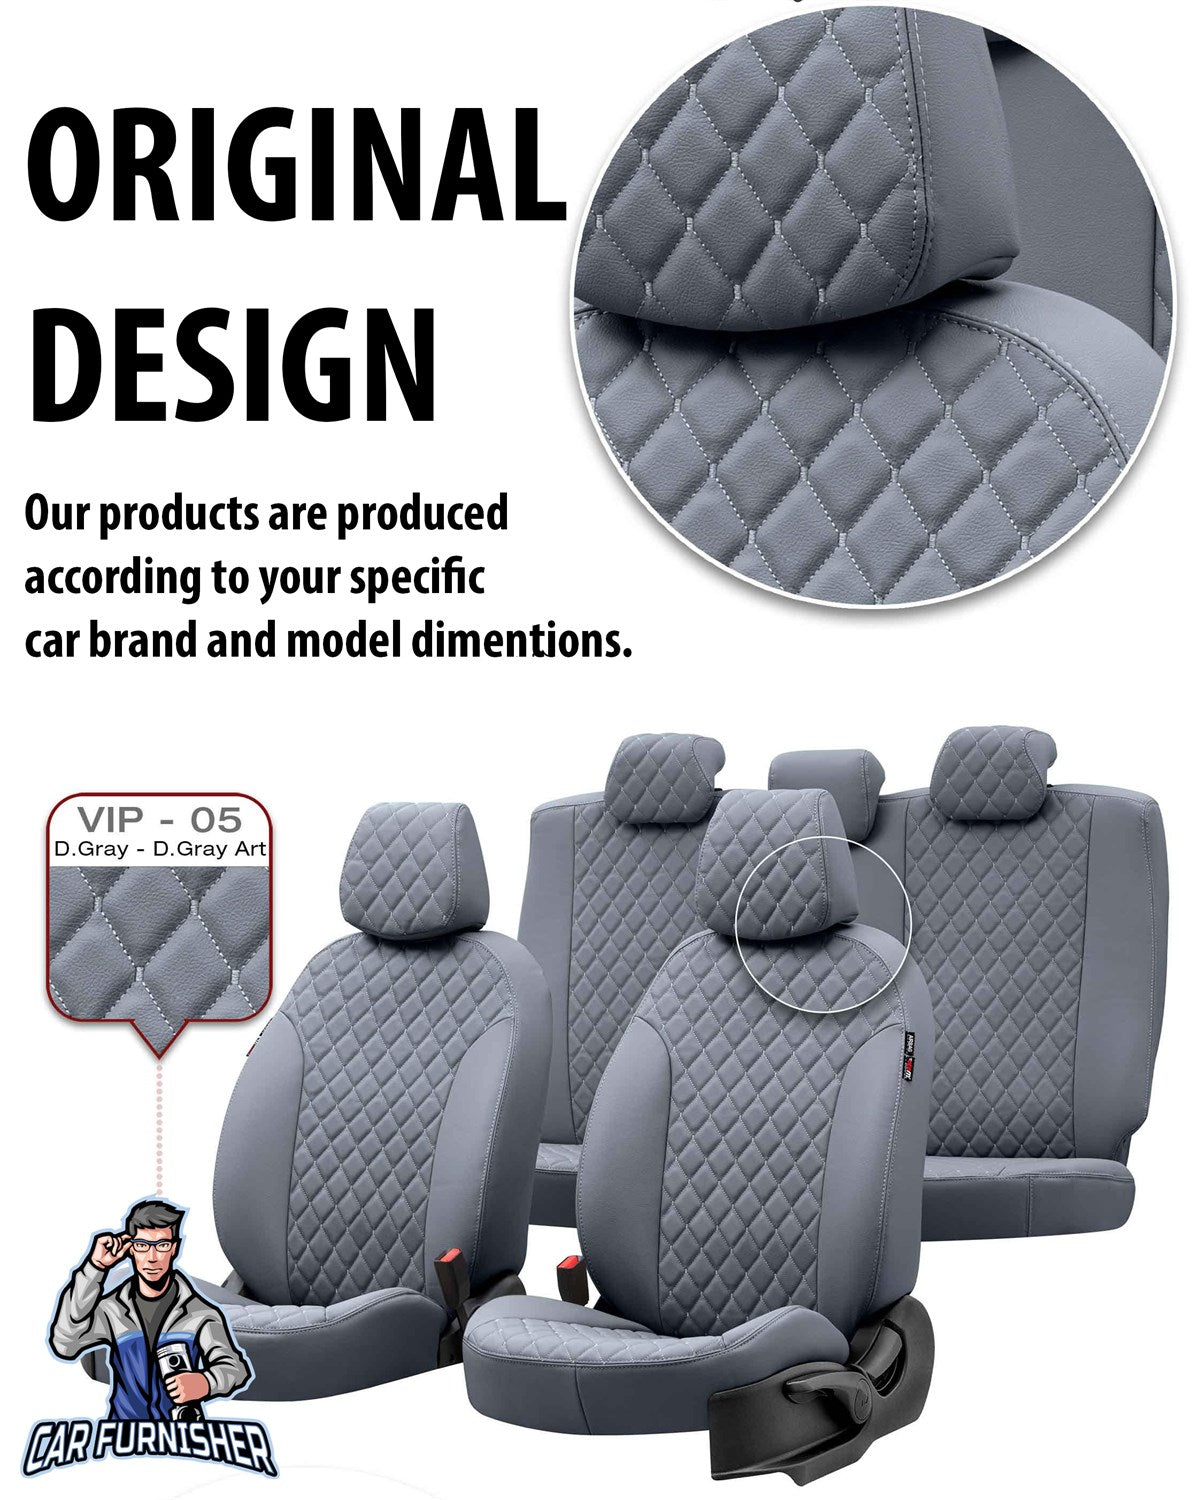 Fiat Panda Seat Covers Madrid Leather Design Blue Leather